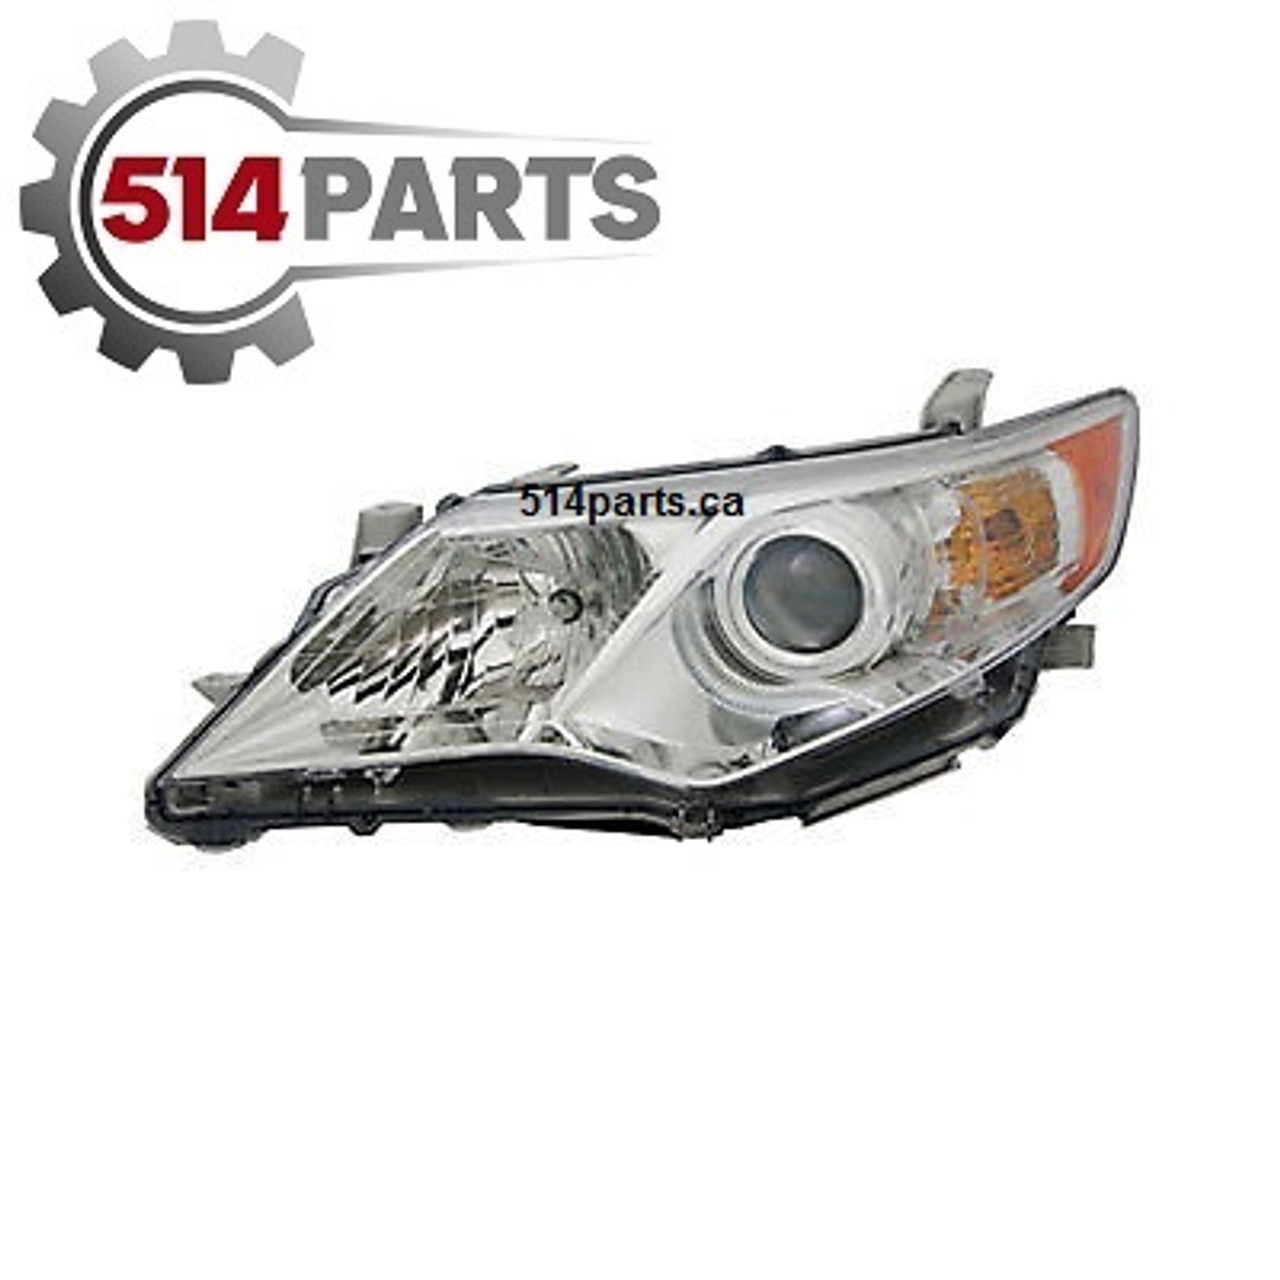 2012 - 2014 TOYOTA CAMRY and CAMRY HYBRID L/LE/XLE Models HEADLIGHTS High Quality - PHARES AVANT Haute Qualite